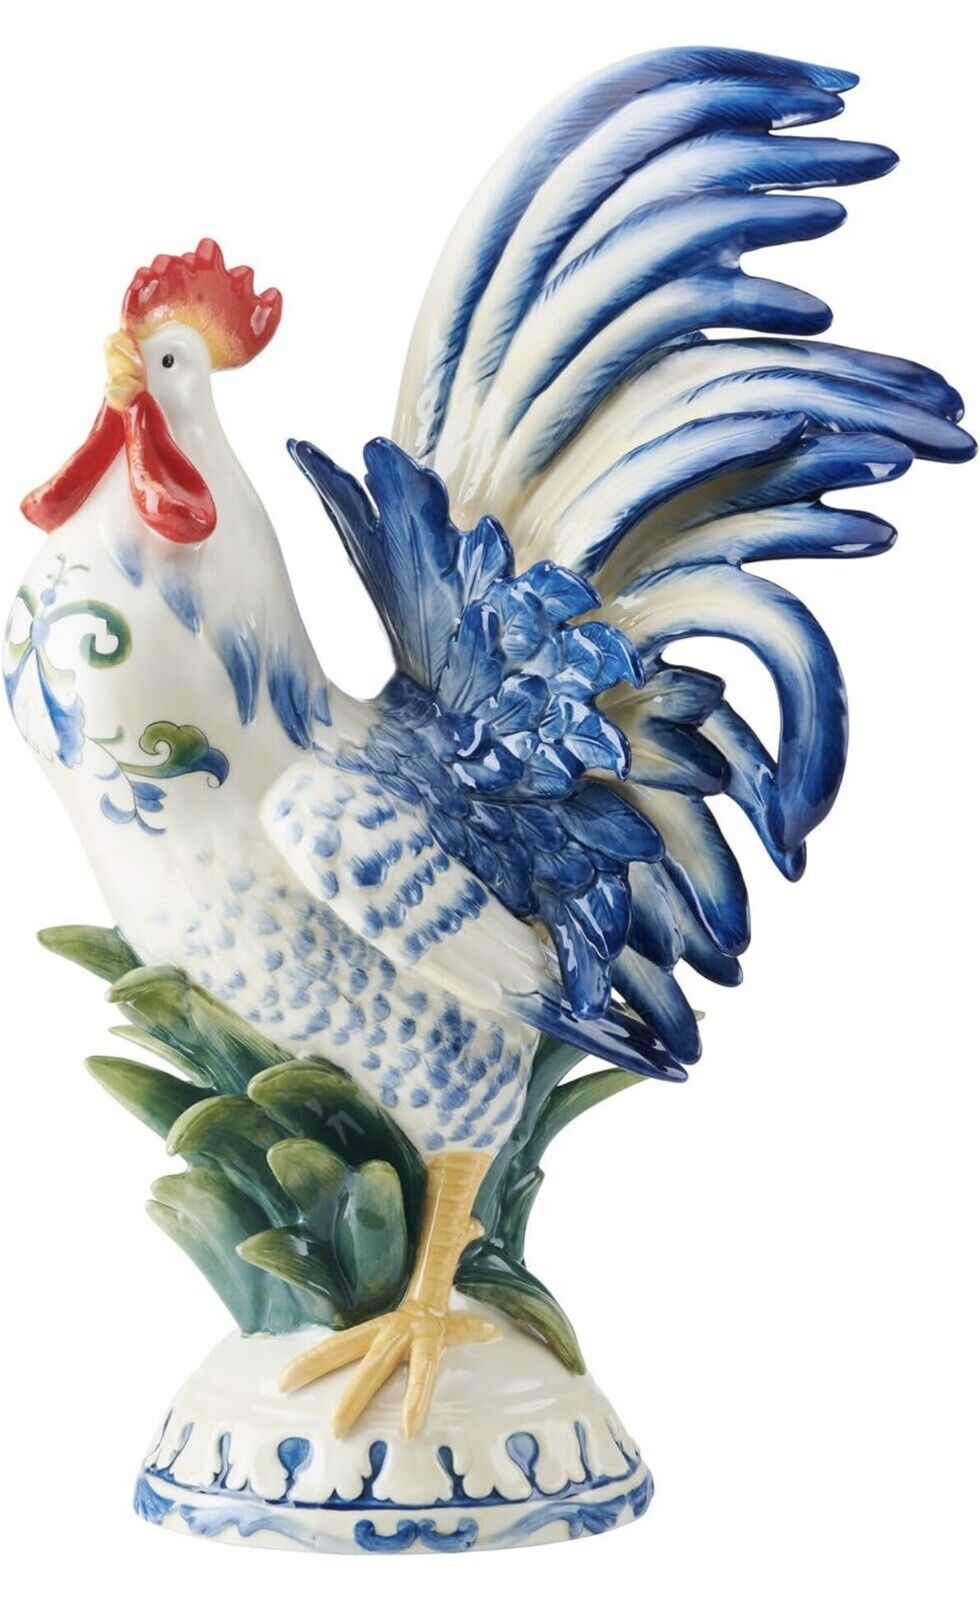 Fitz and Floyd Ceramic Rooster Figurine, Sicily Blue, 20-Inch